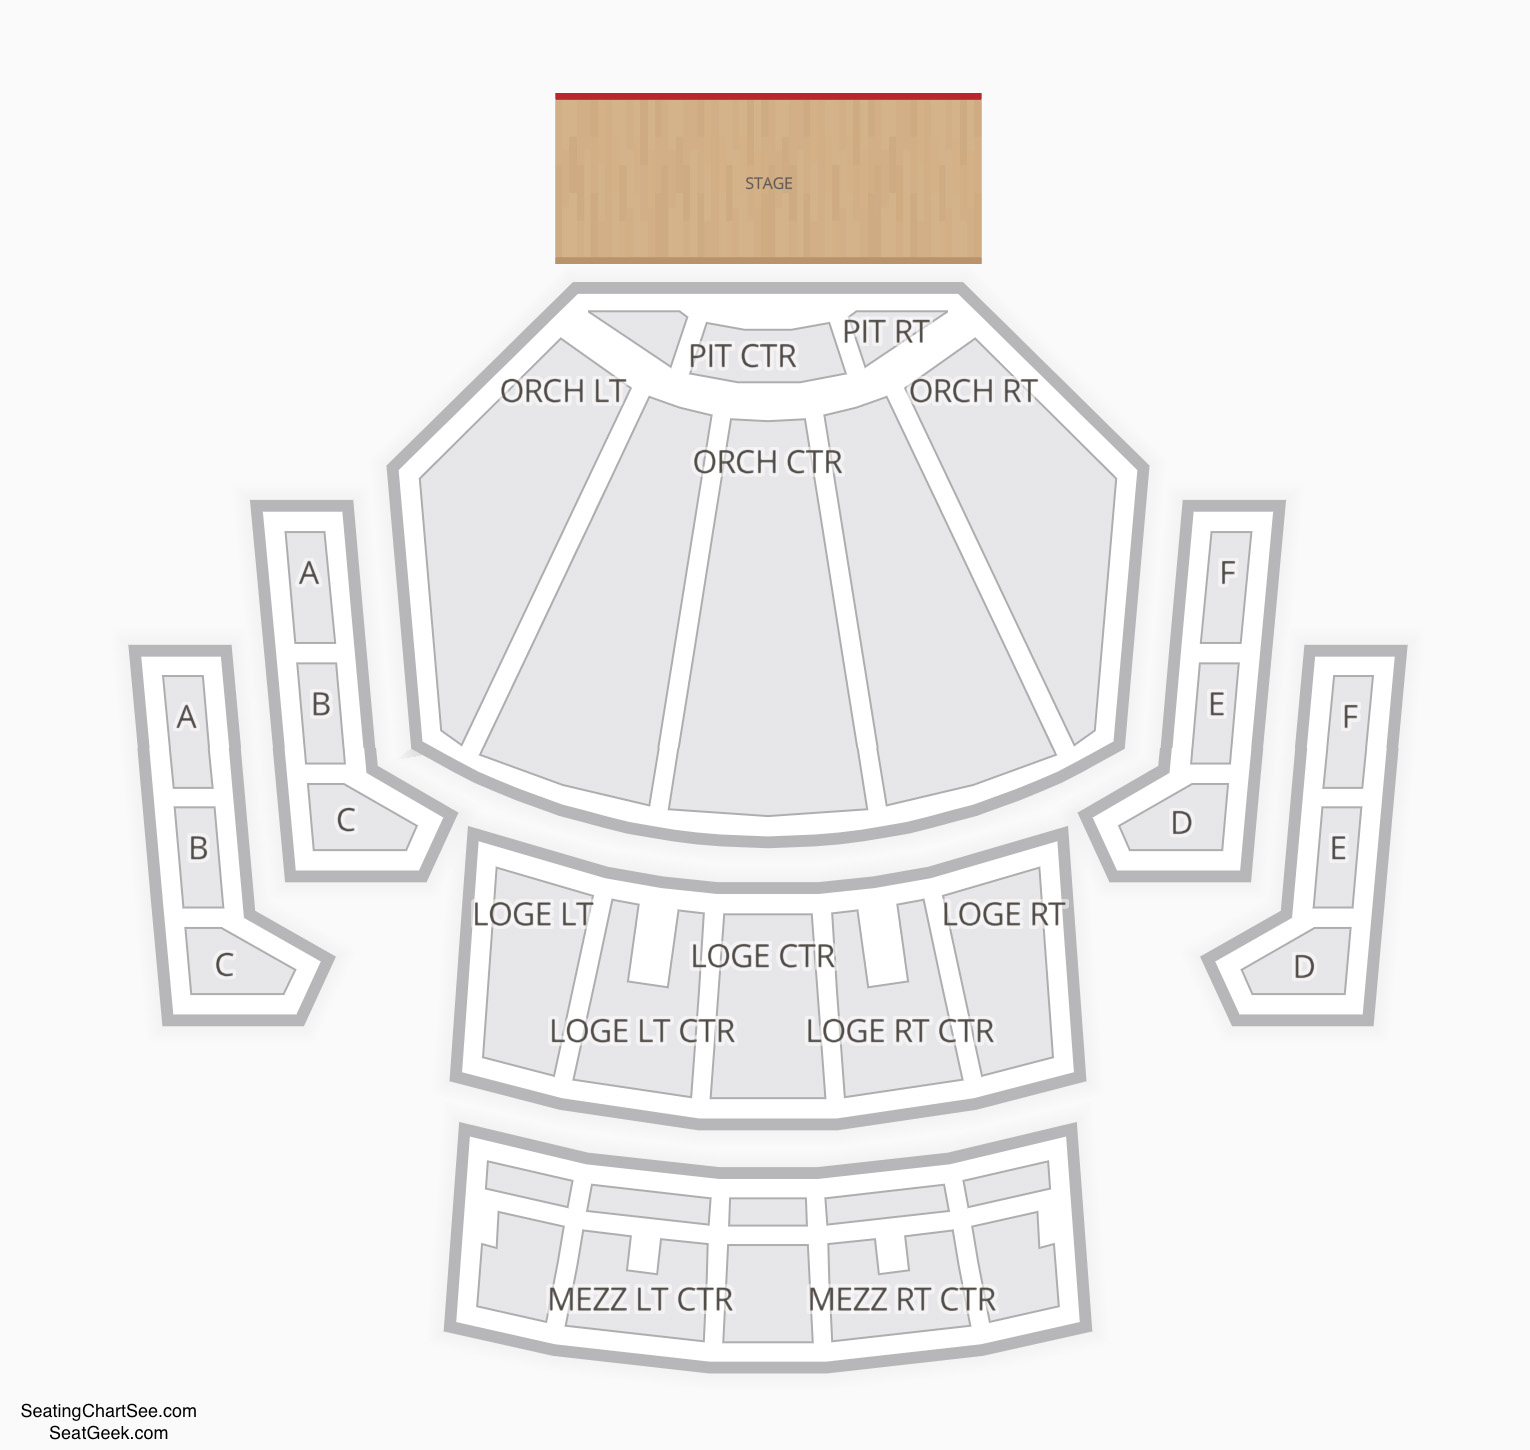 Fajarv Zappos Theater Seating View